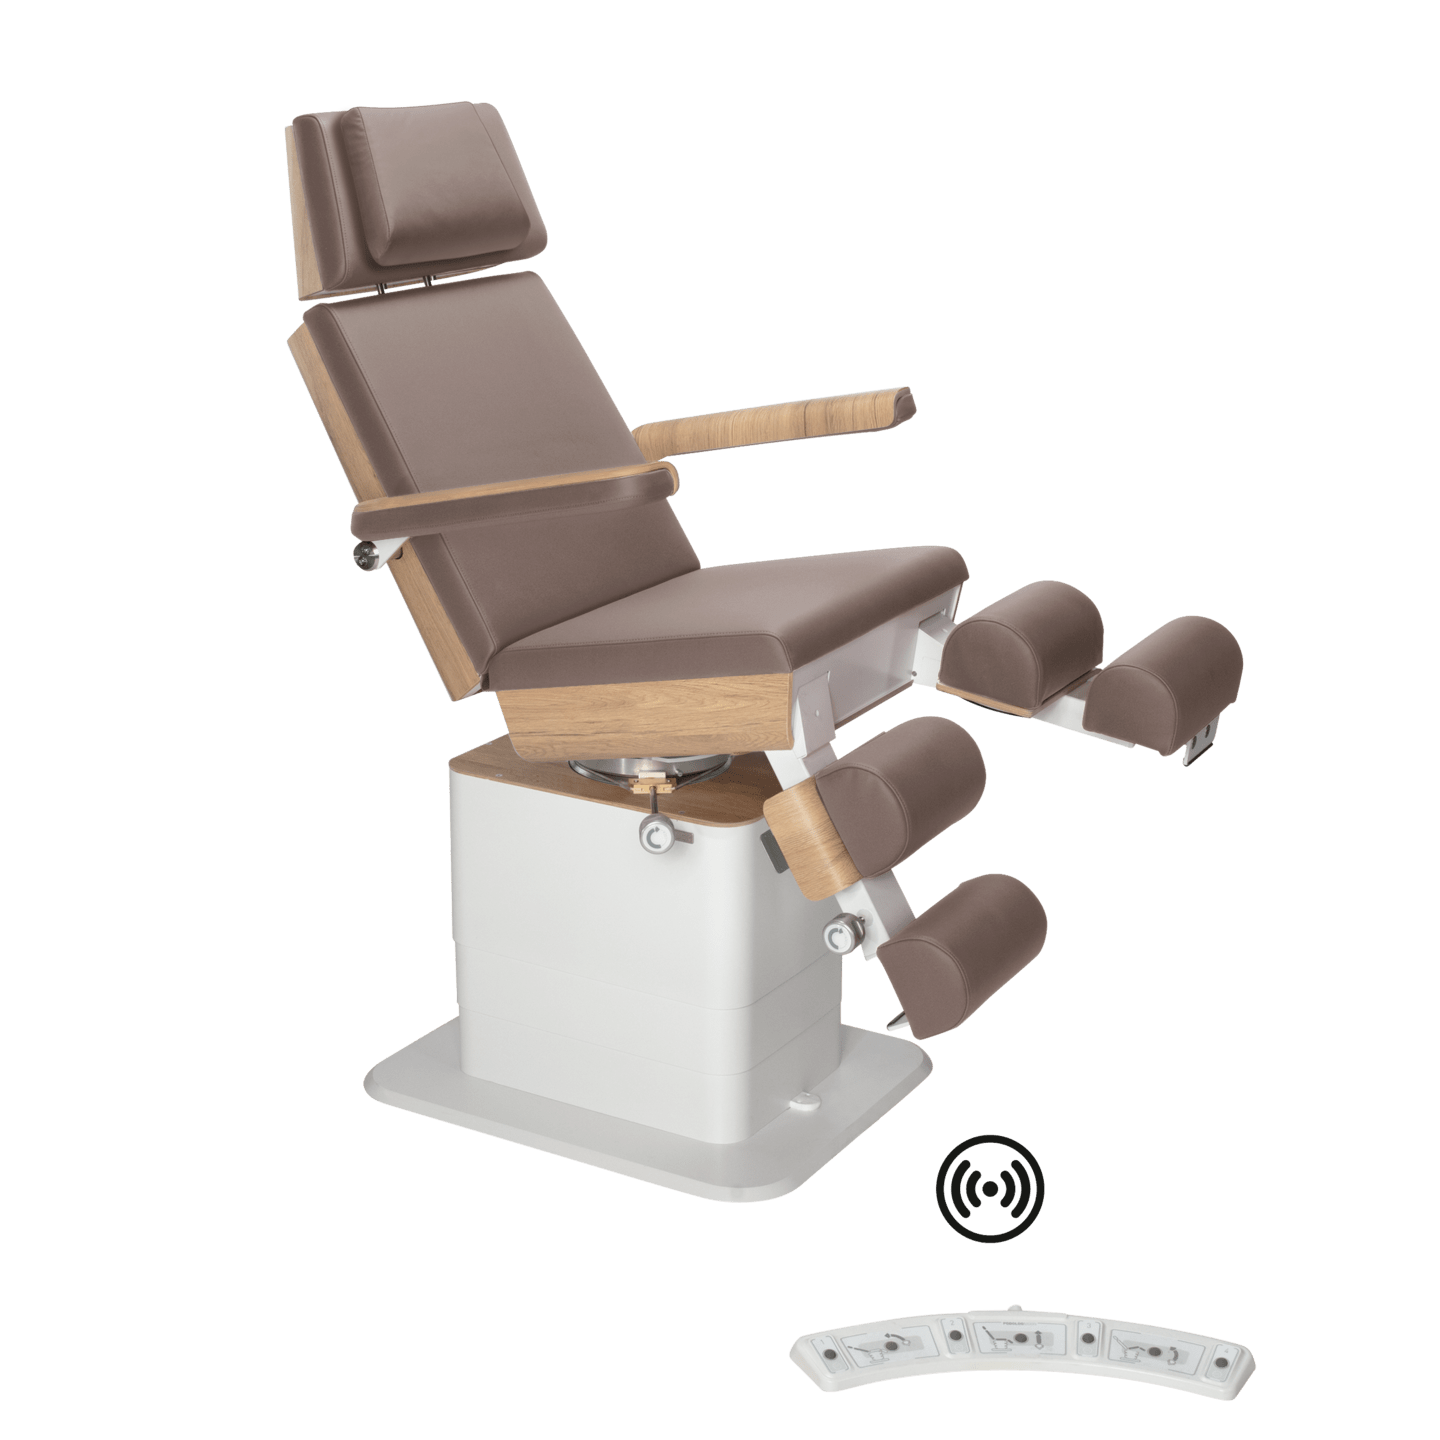 RUCK MOON Podiatry Treatment Chair/Couch, CPL oak, nutmeg, with manual leg sections, wireless foot control with memory function